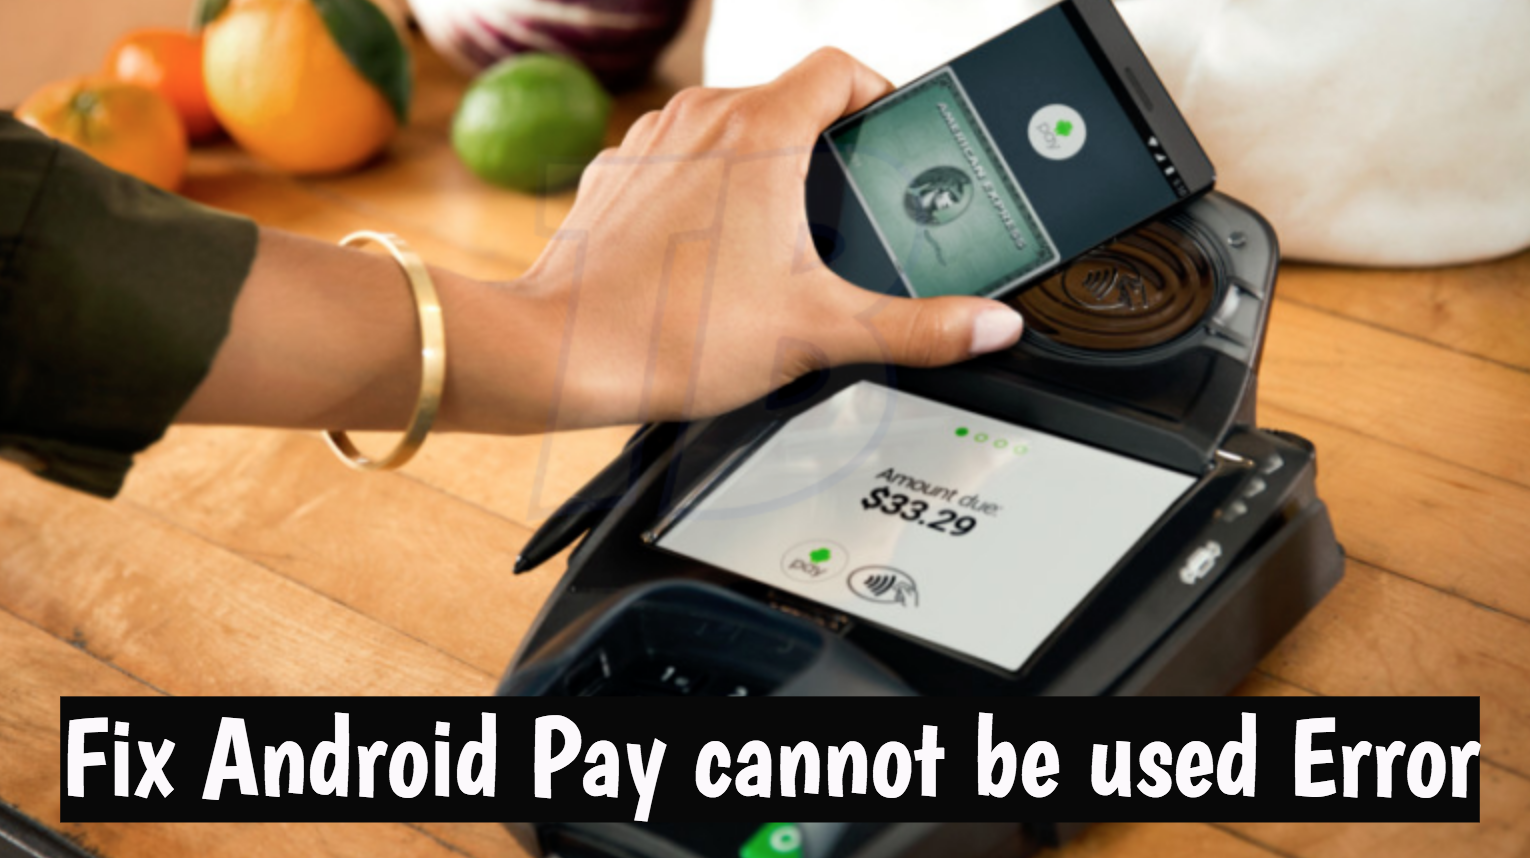 Android Pay cannot be used Error